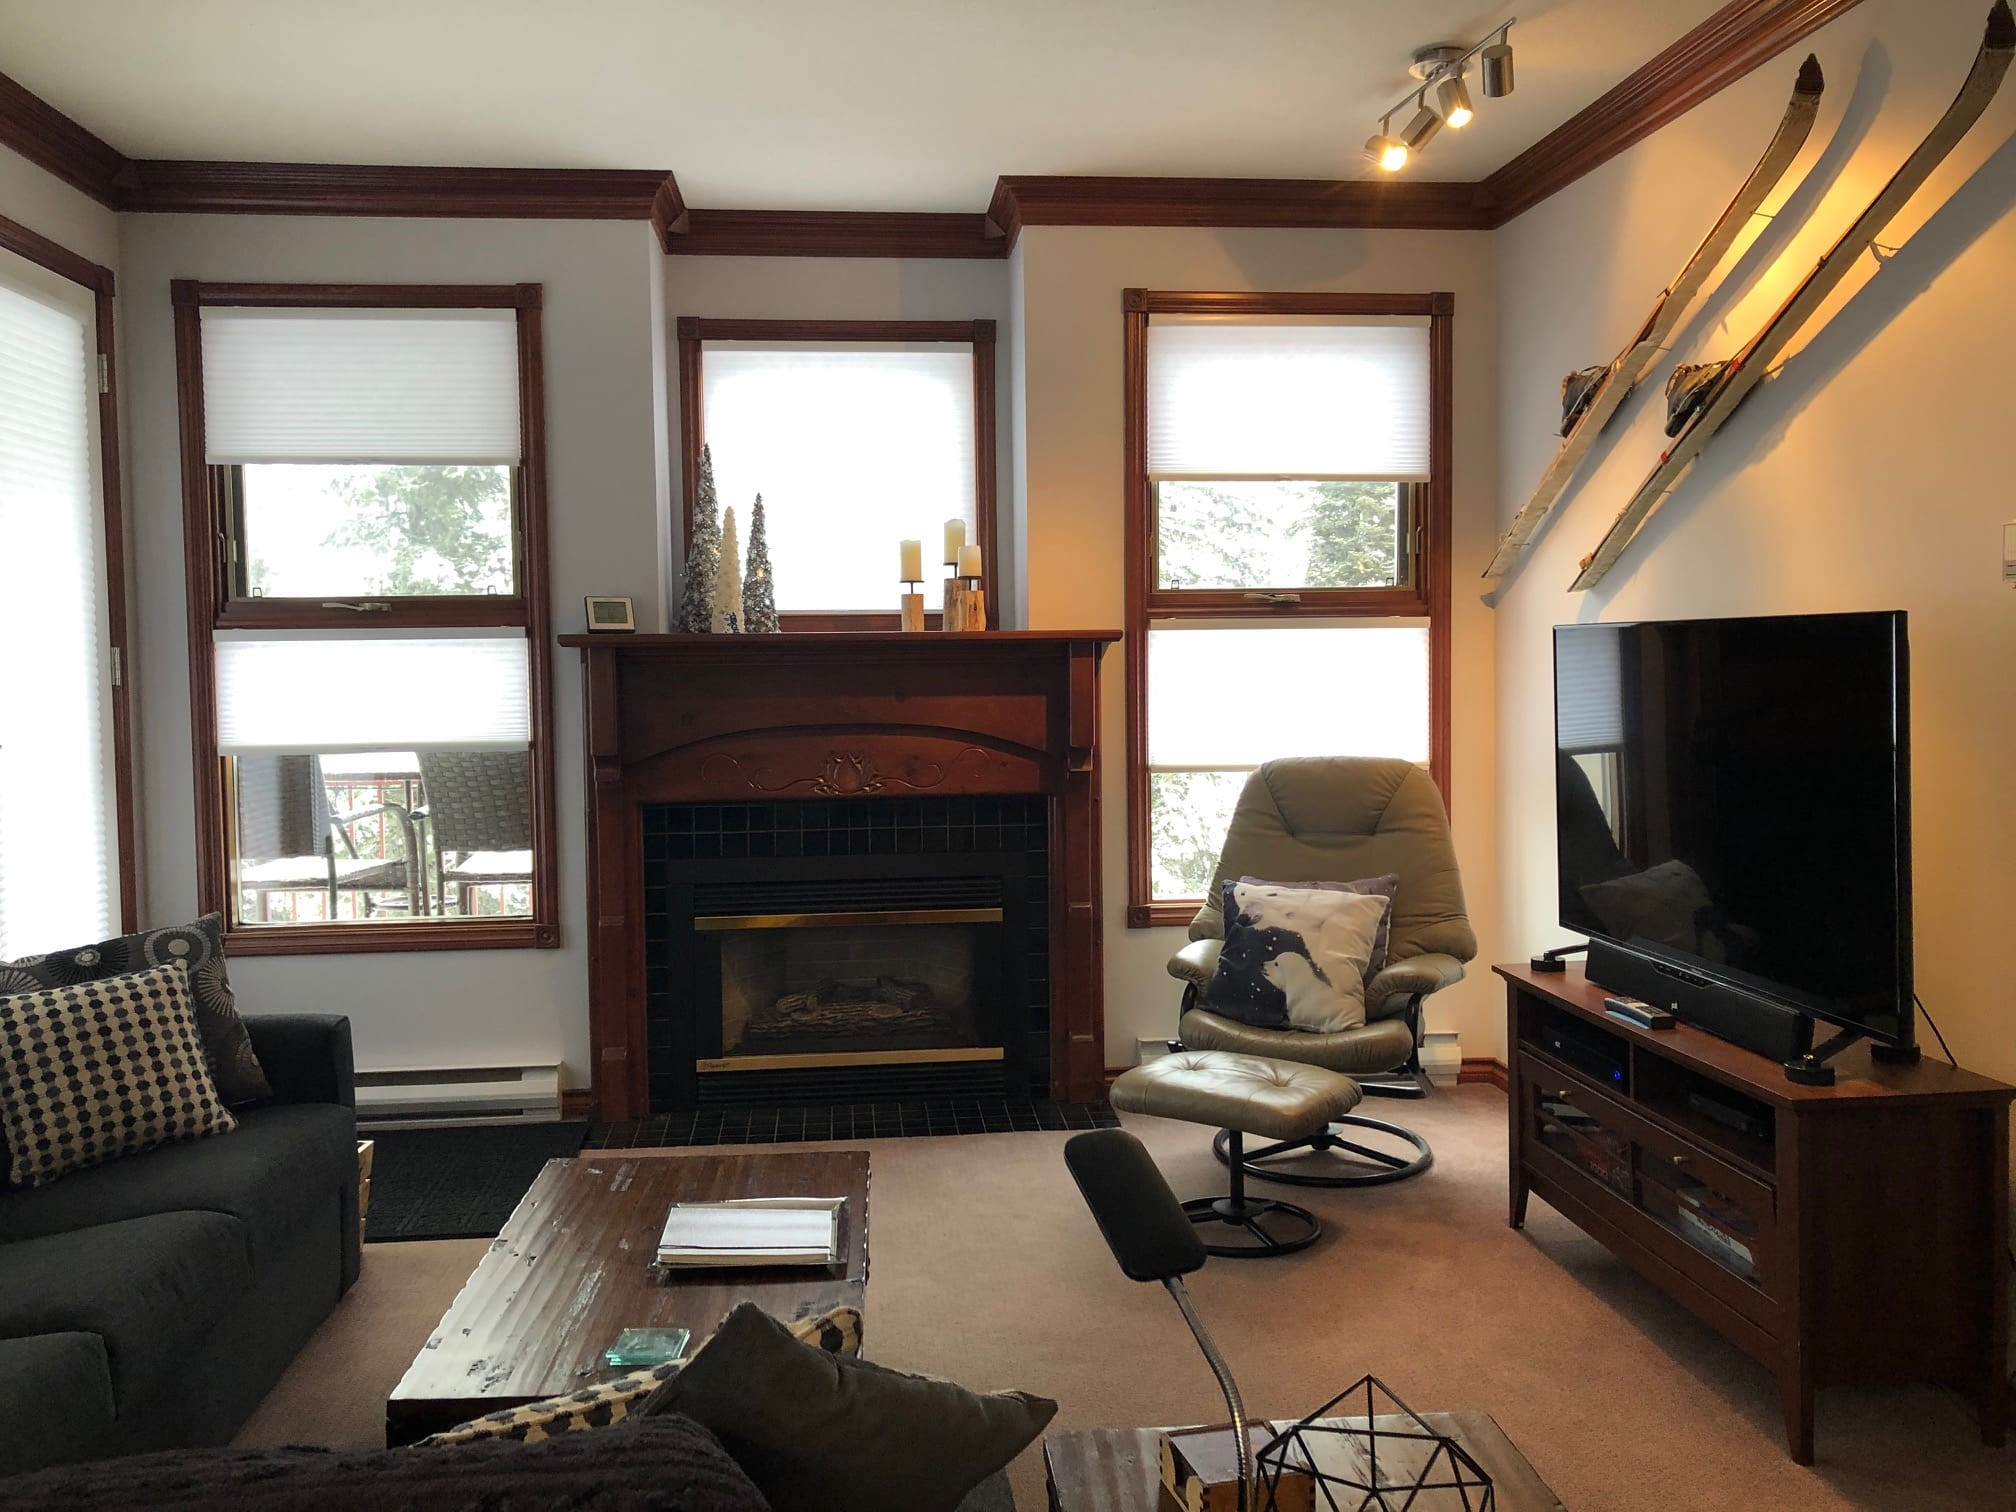 Corner 2nd floor condo, recently upgraded with new furniture and appliances. Bright open windows with views of the mountains, outdoor deck & BBQ, private laundry and great ski out access.